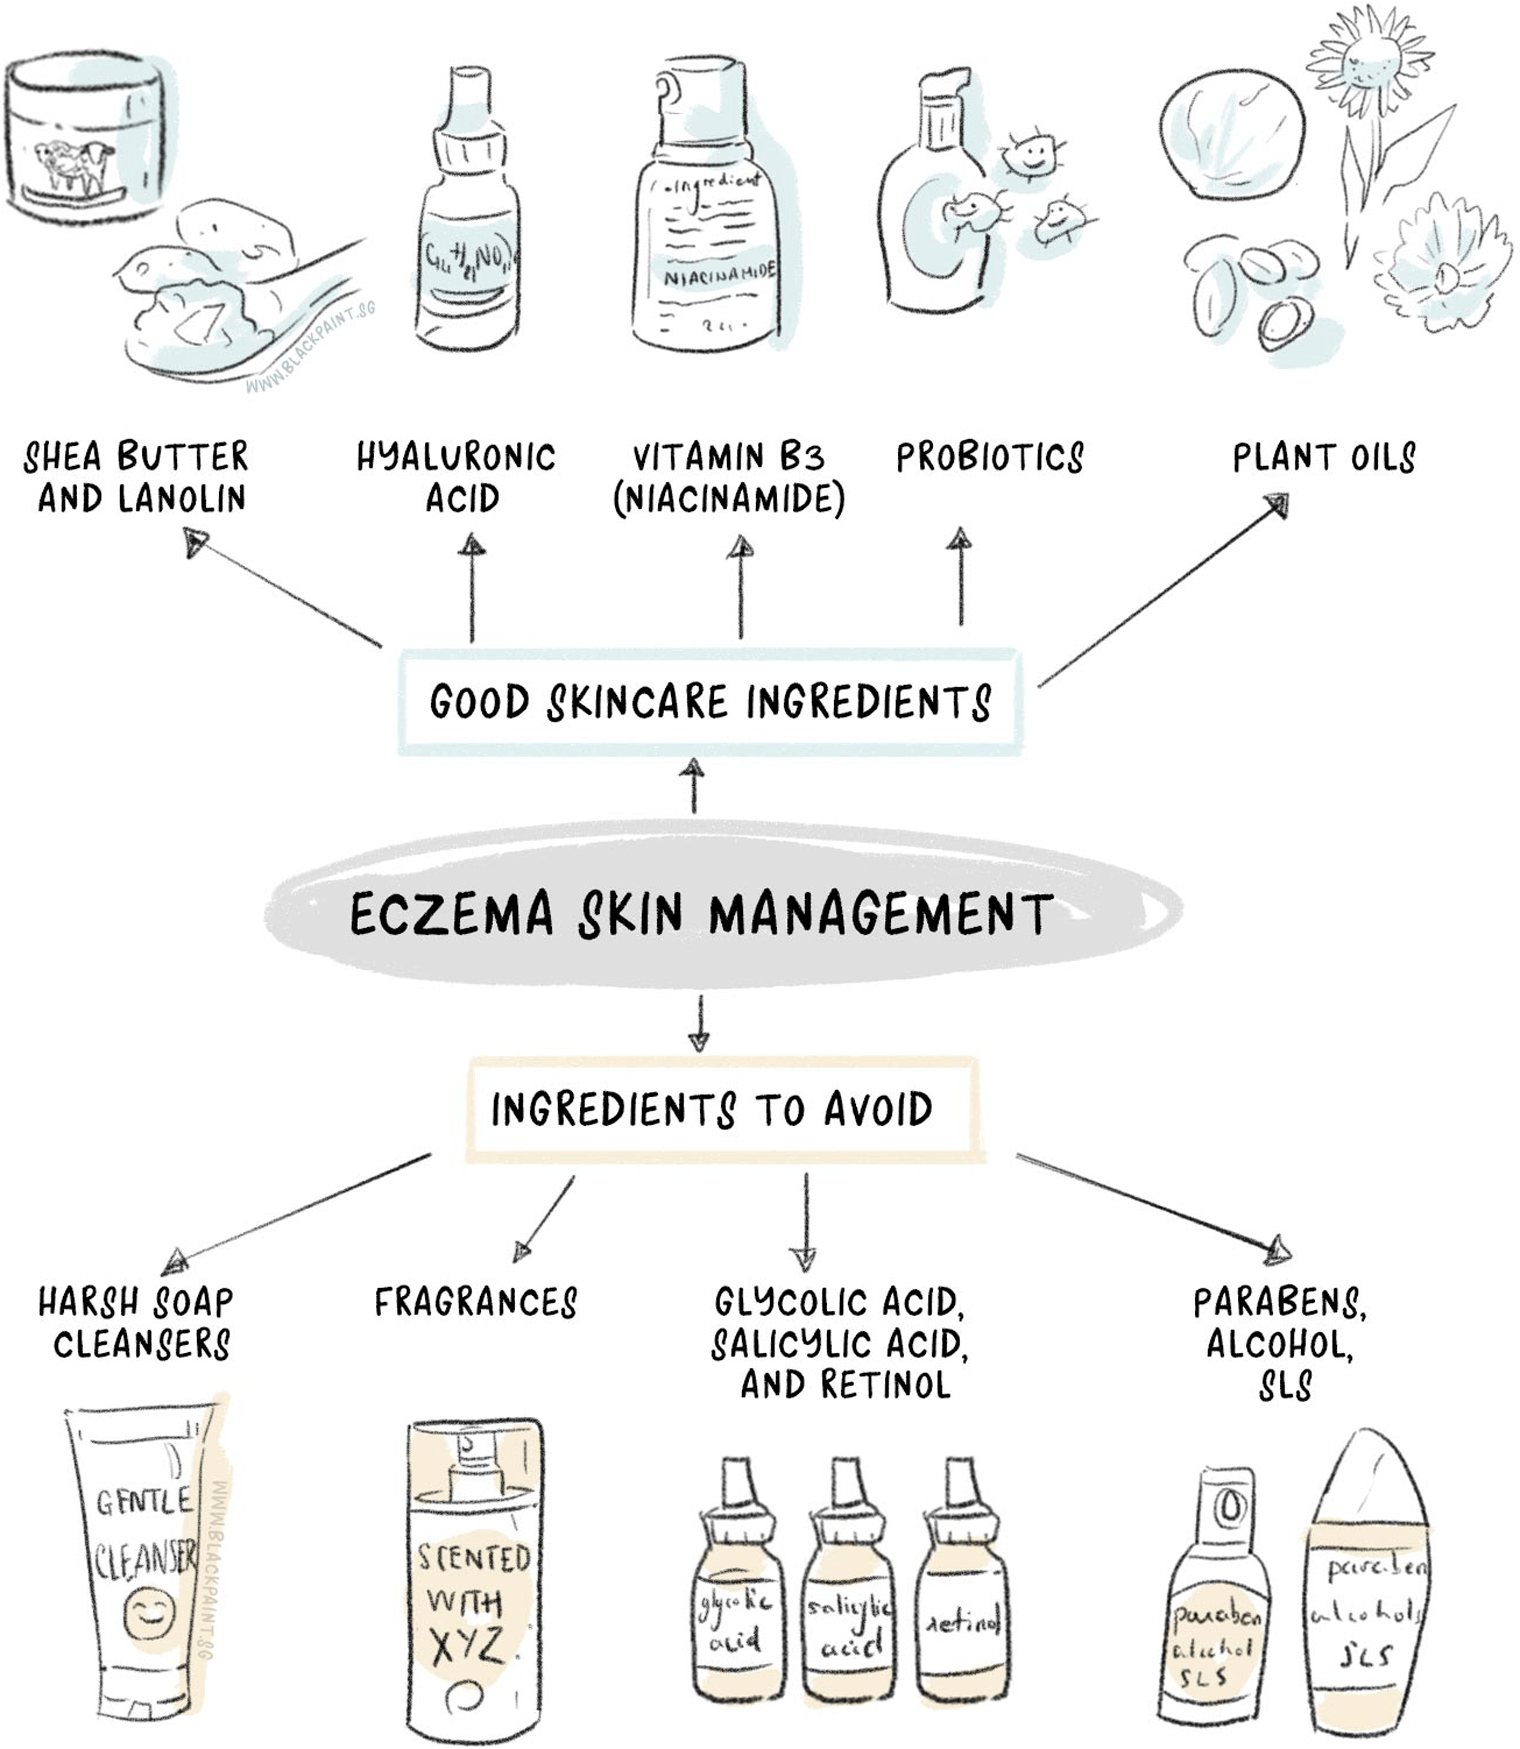 illustration of being mindful of your choices of skincare products if eczema is a problem for you.